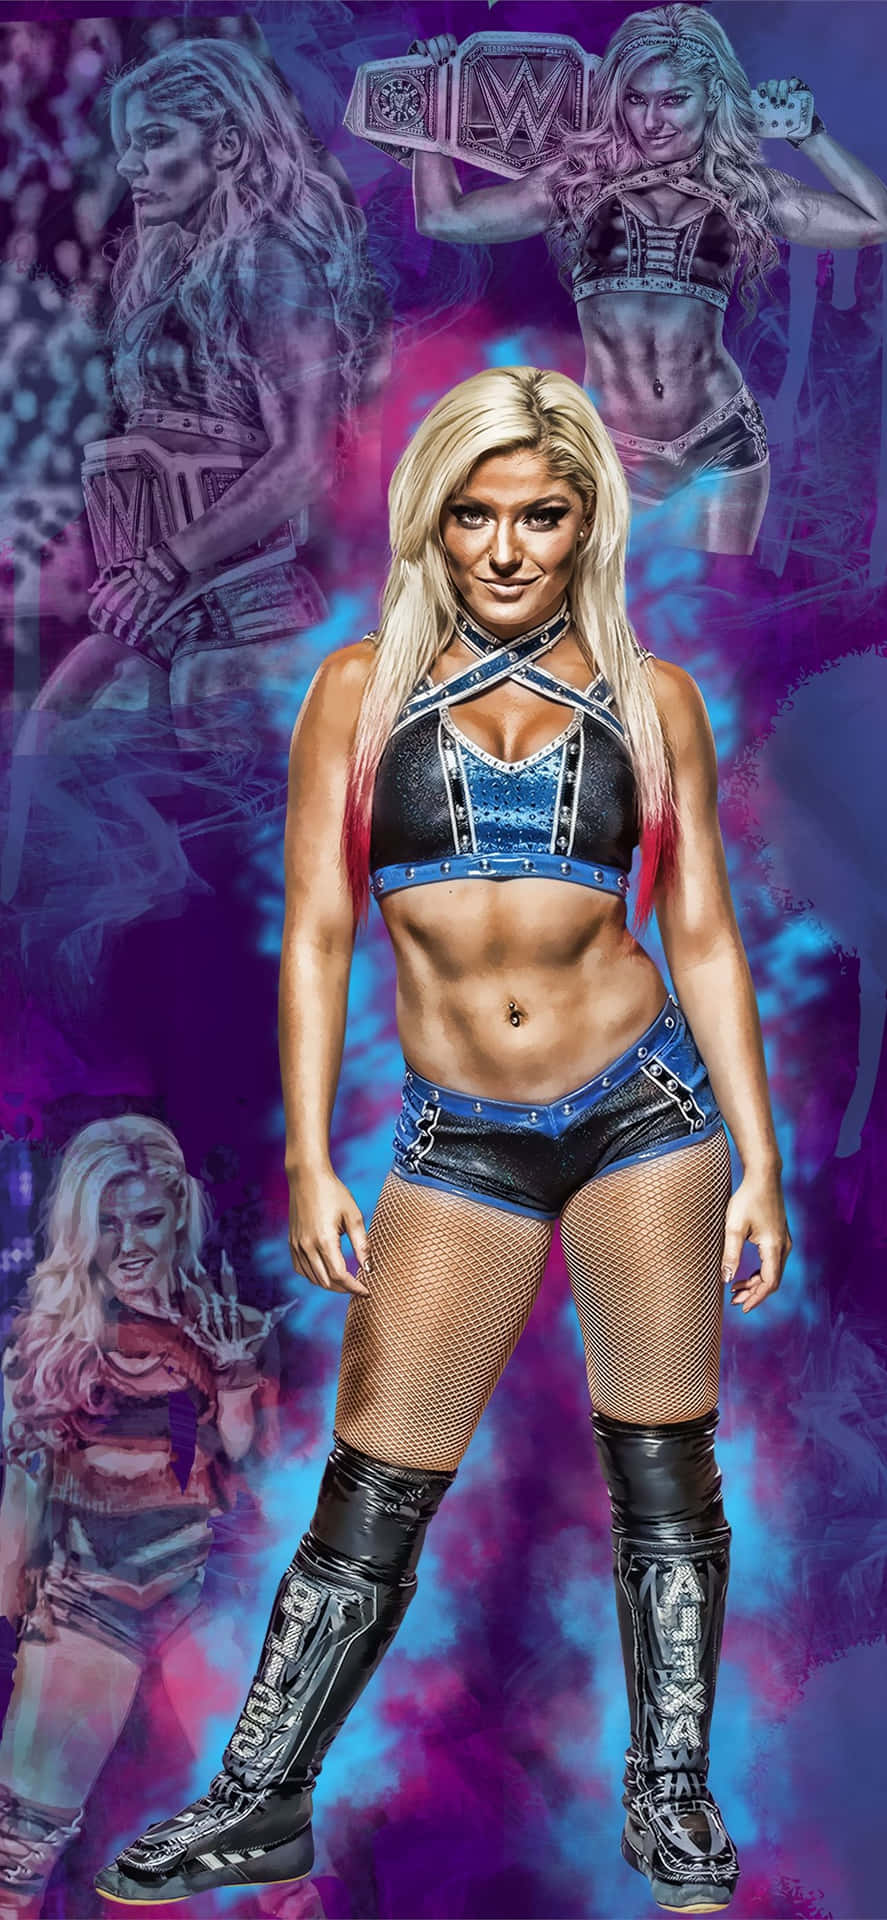 Wwe Wrestler In Purple And Blue Outfit Background